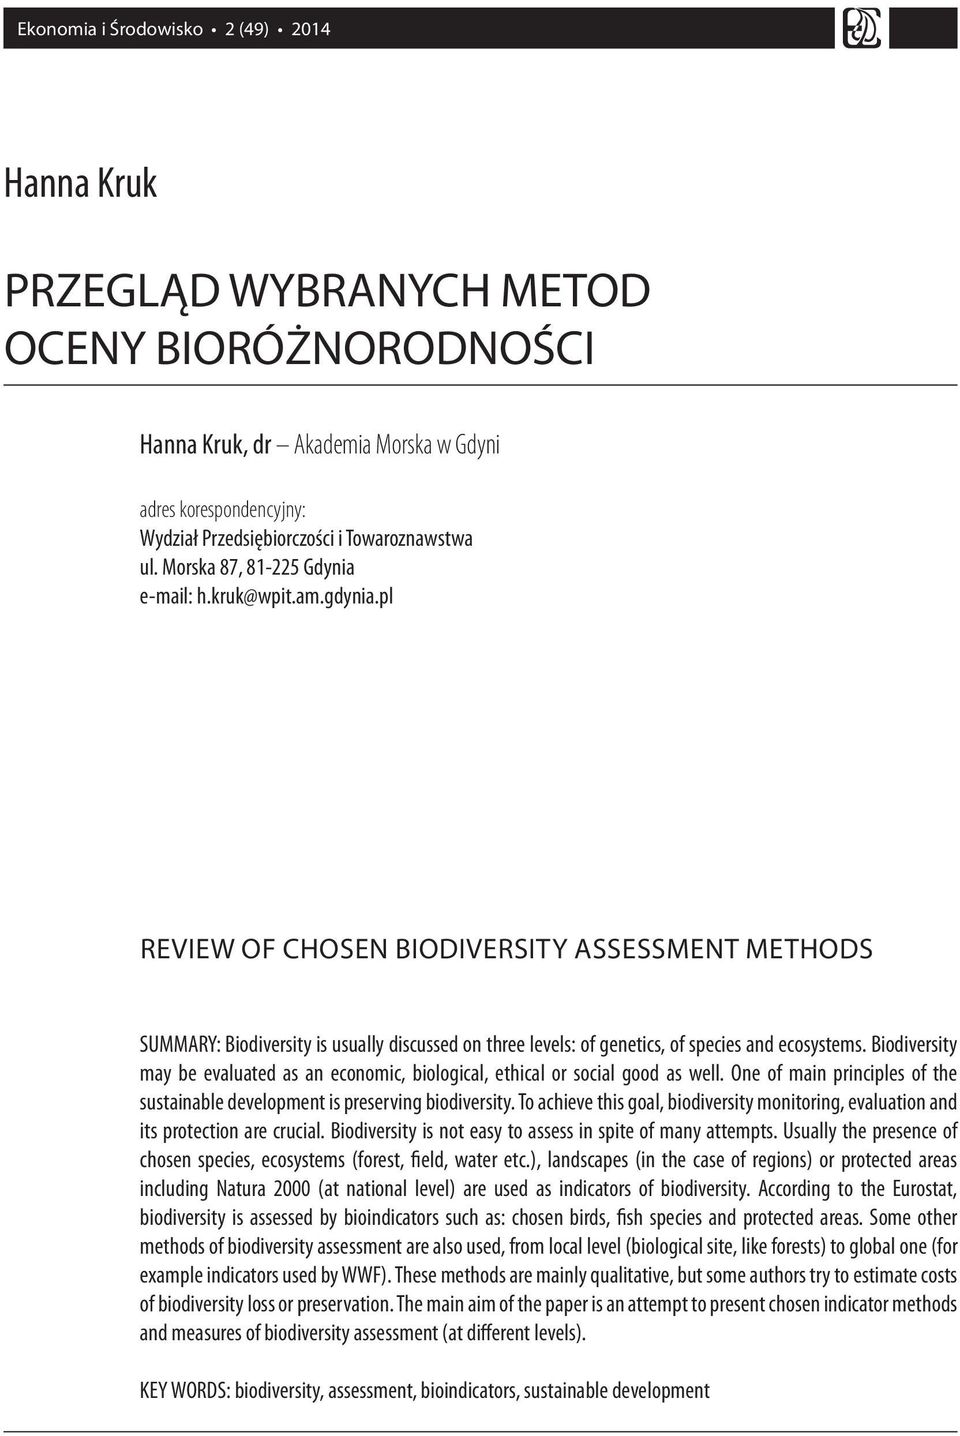 pl REVIEW OF CHOSEN BIODIVERSITY ASSESSMENT METHODS SUMMARY: Biodiversity is usually discussed on three levels: of genetics, of species and ecosystems.